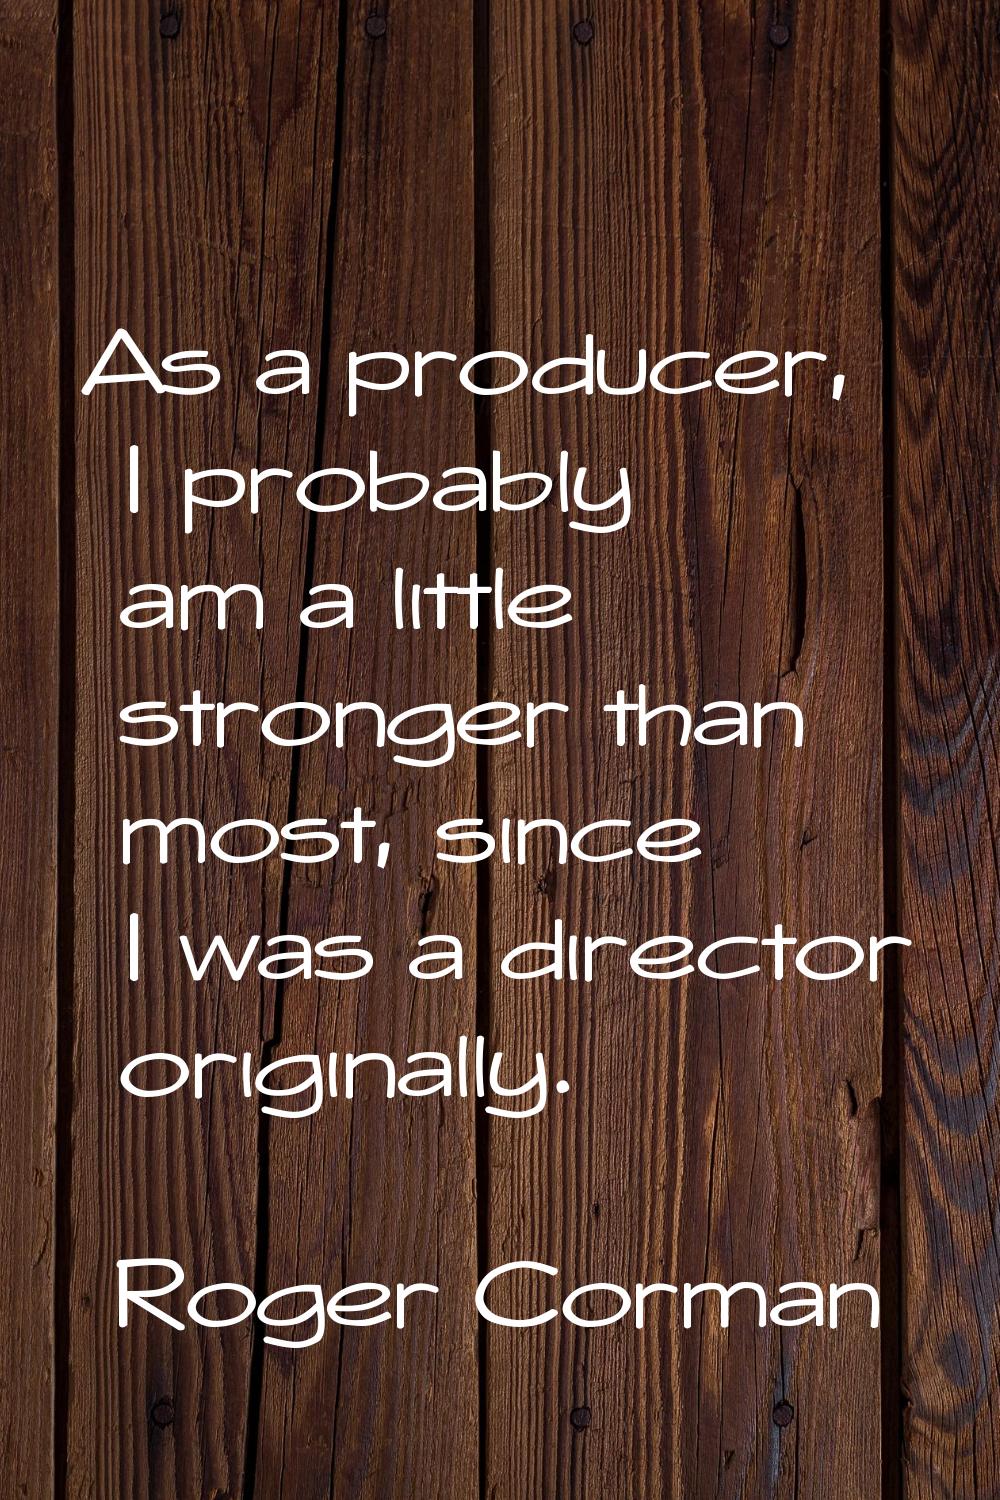 As a producer, I probably am a little stronger than most, since I was a director originally.